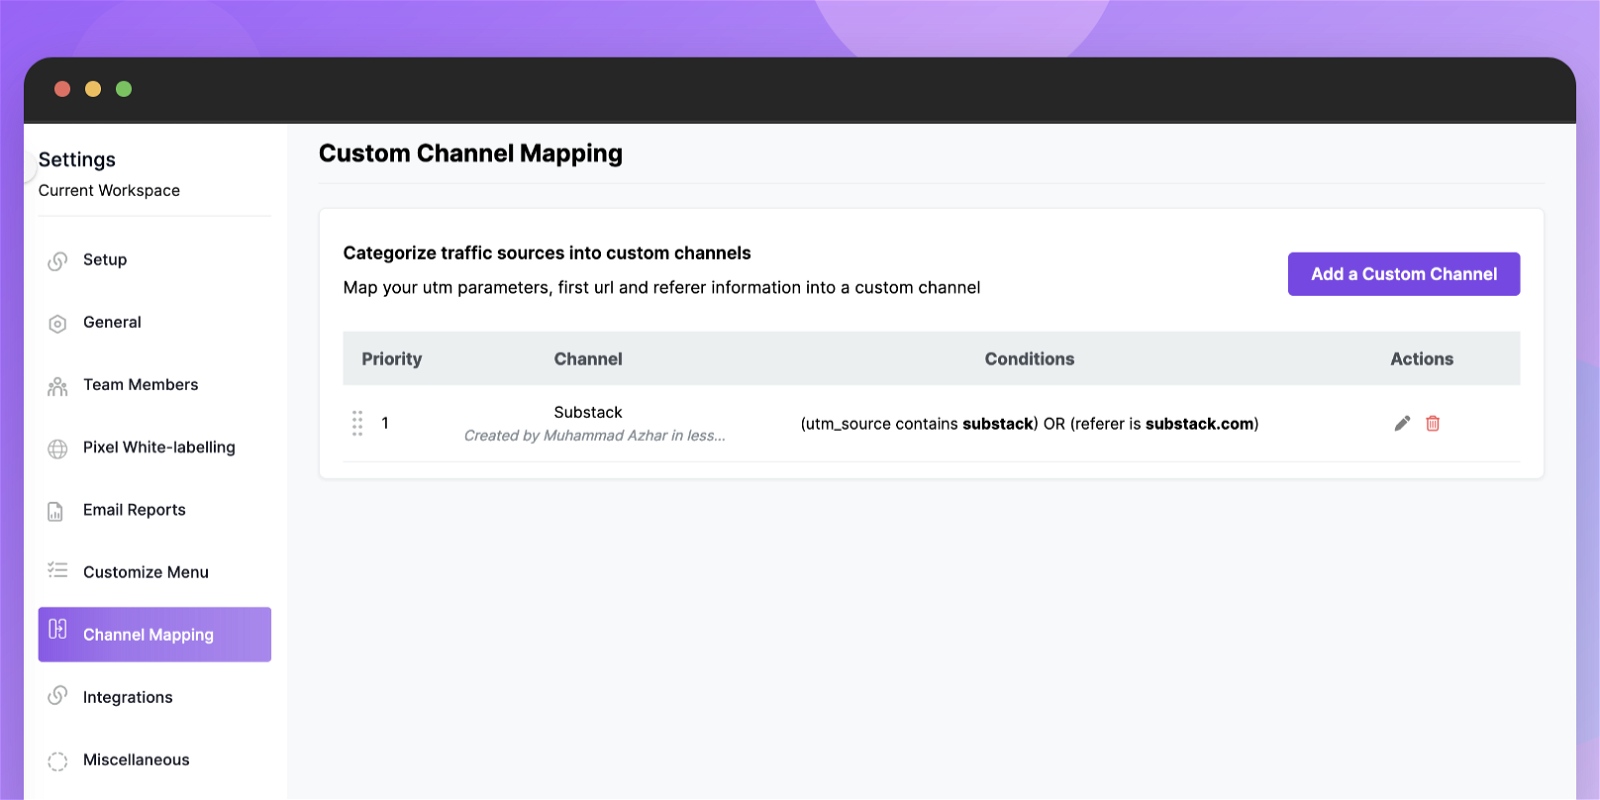 Custom Channel Mapping